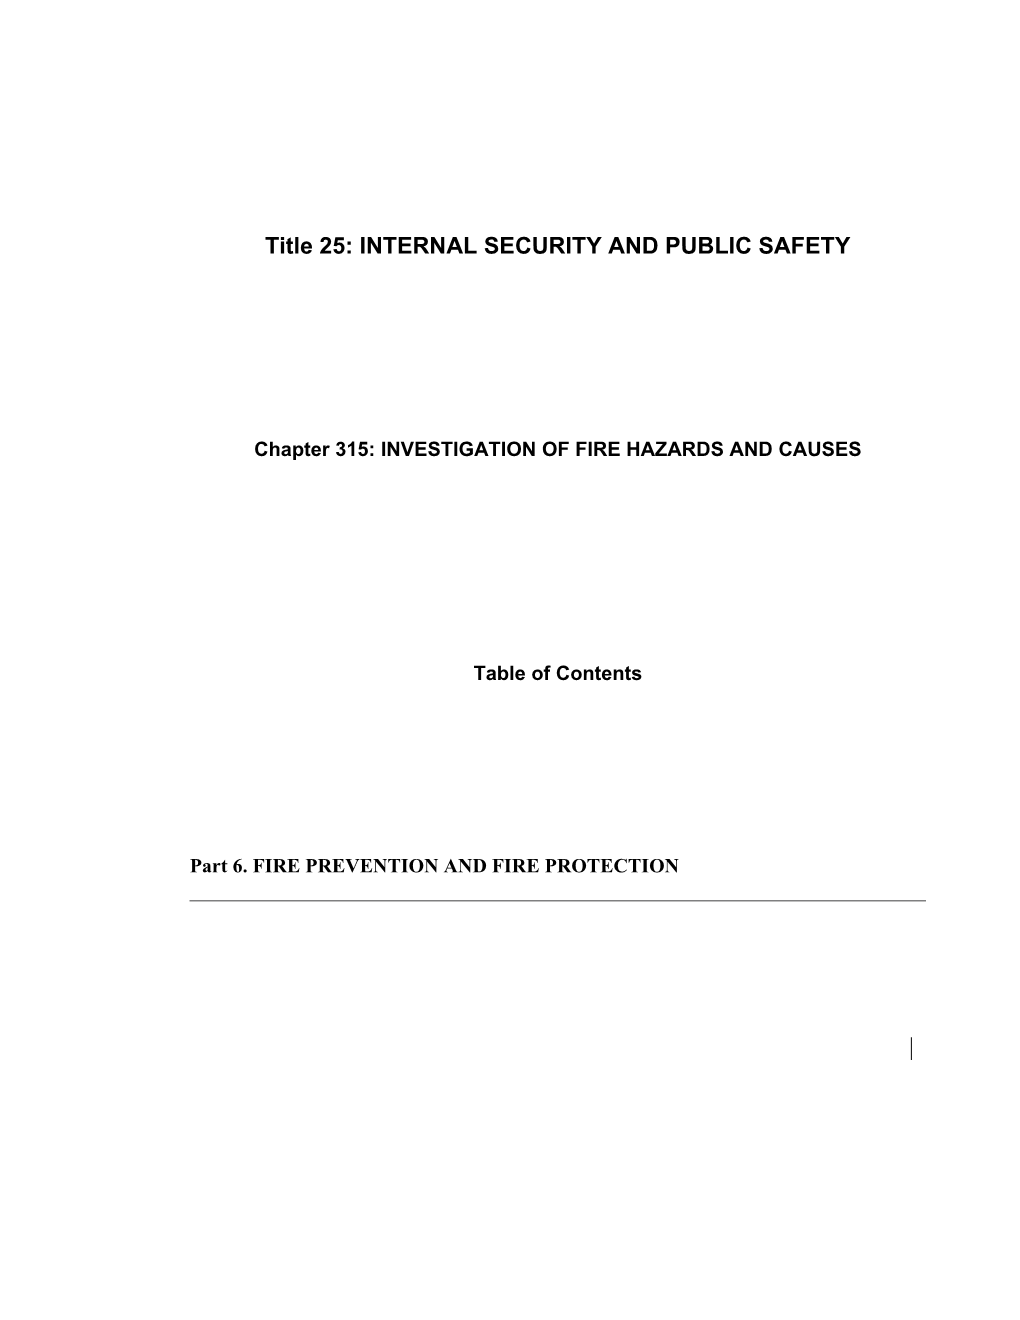 MRS Title 25, Chapter315: INVESTIGATION of FIRE HAZARDS and CAUSES